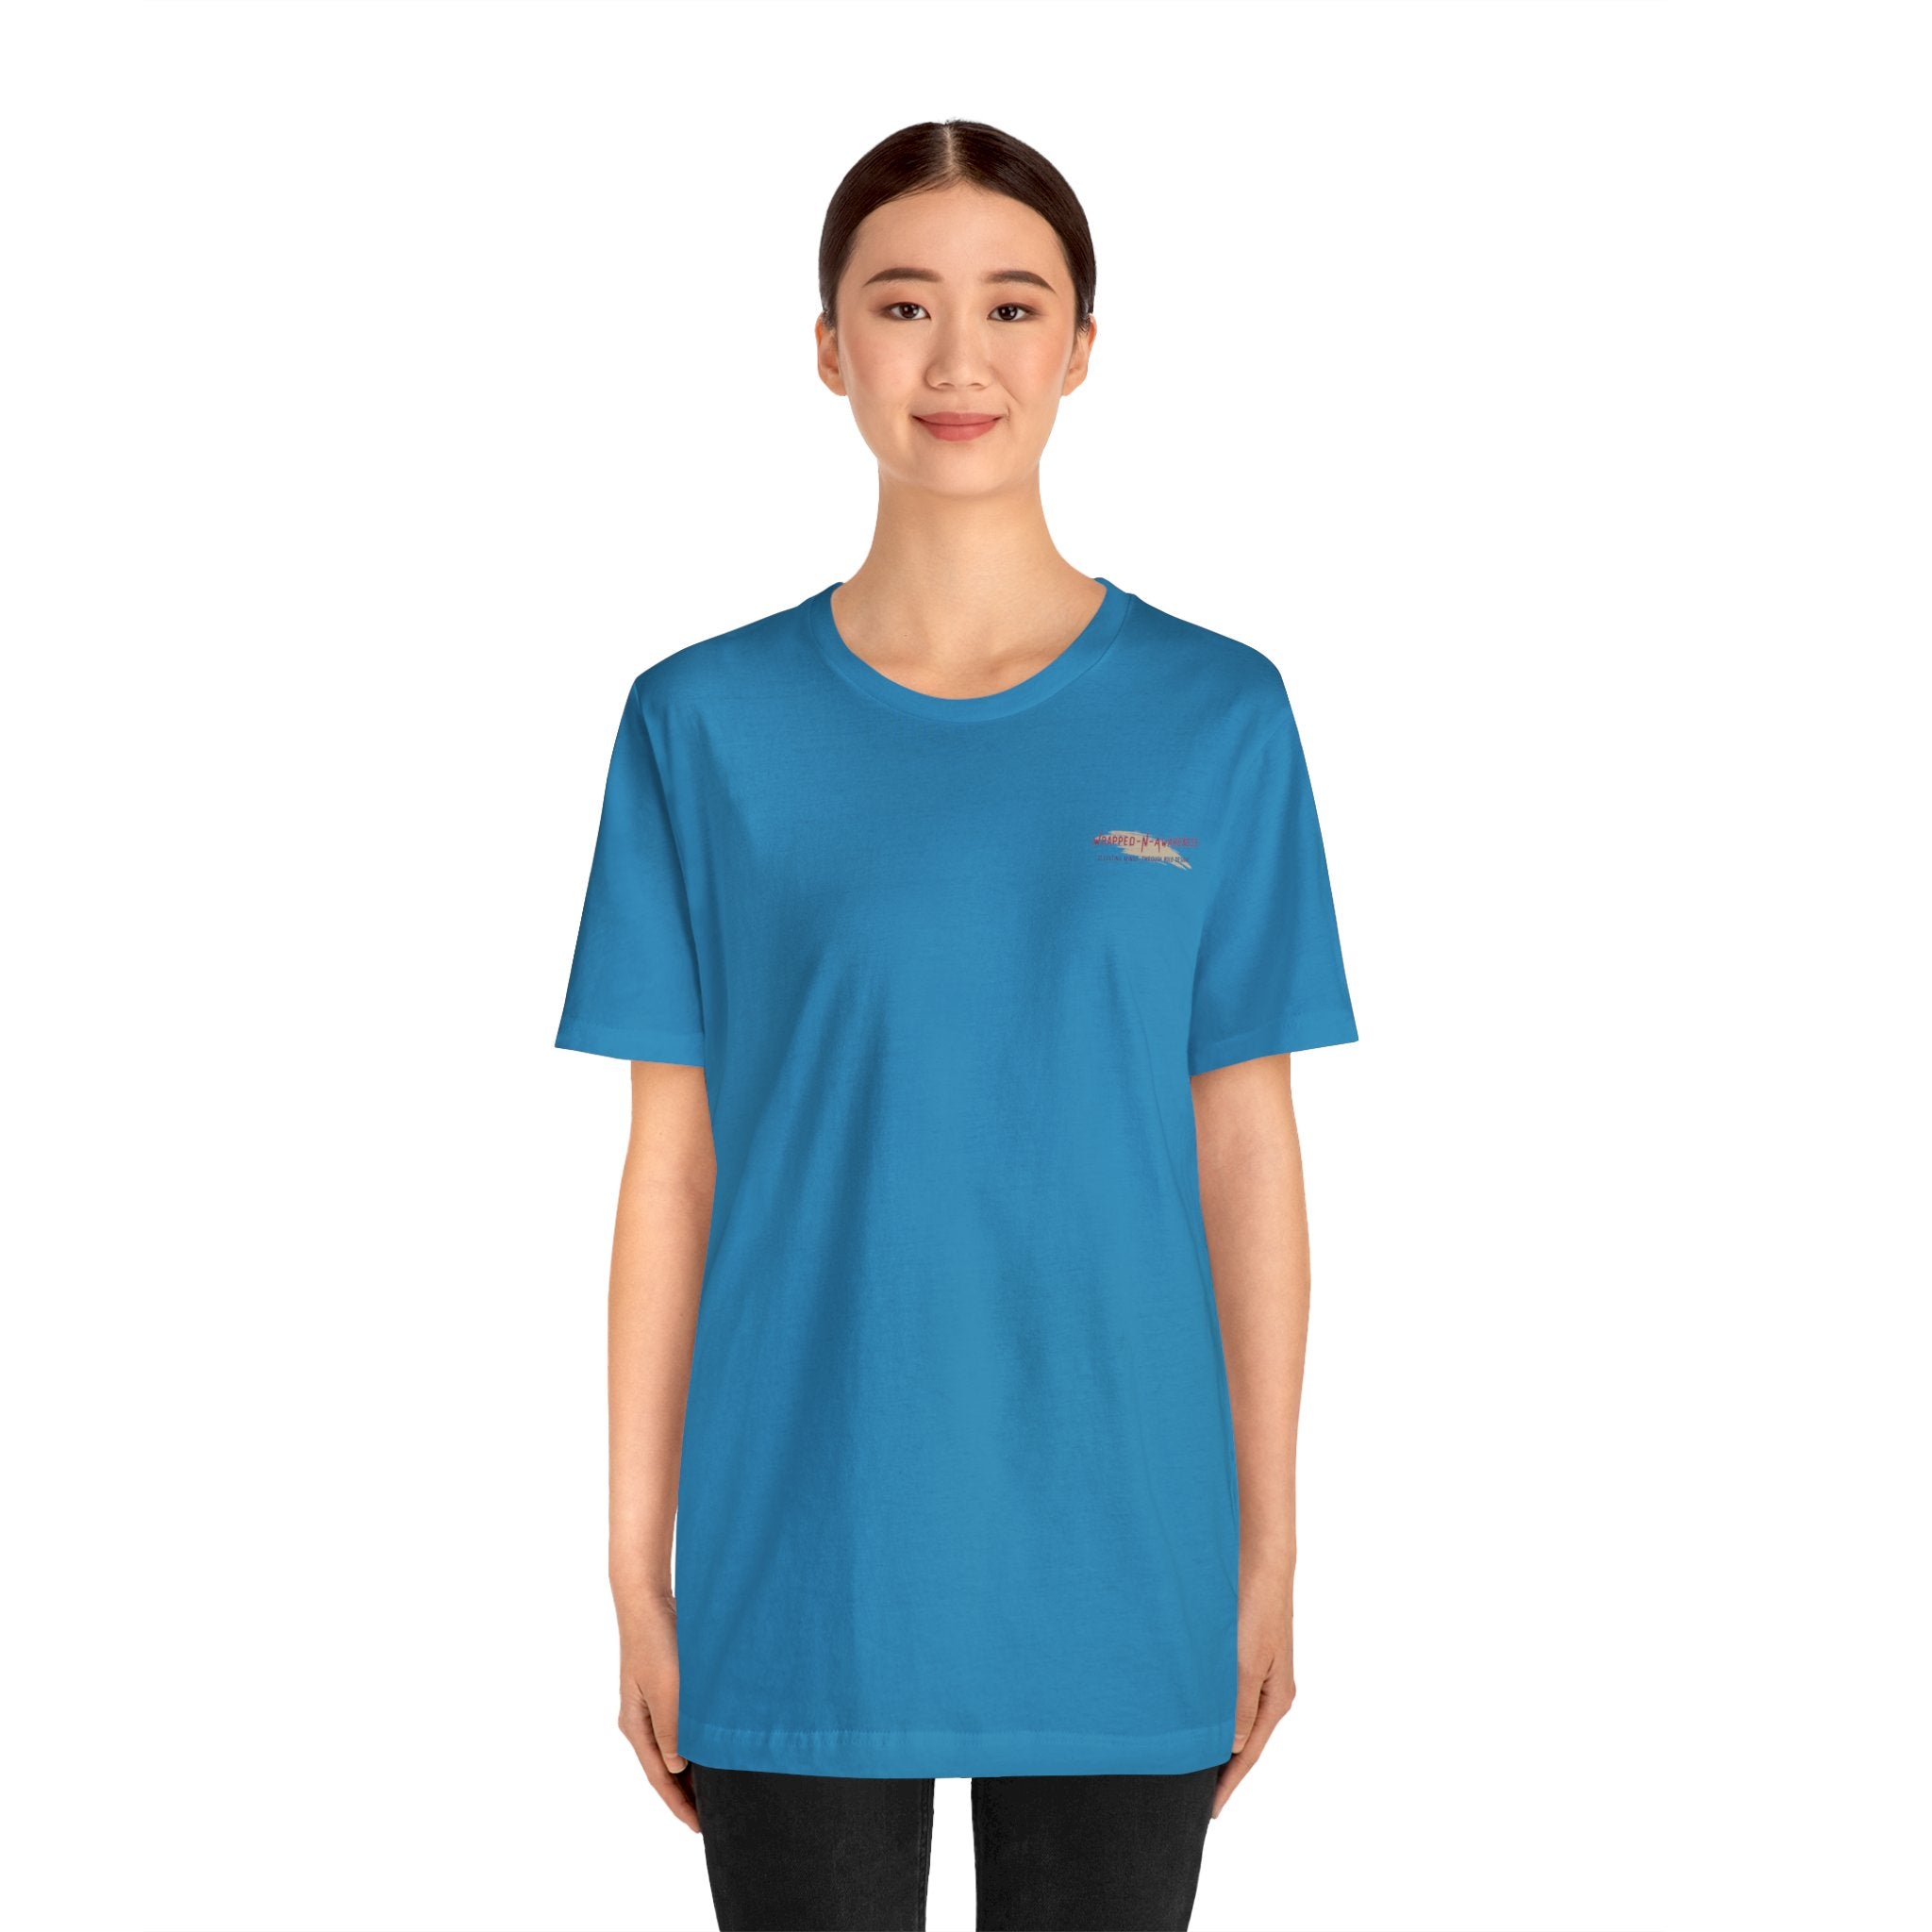 Mindfulness Heals Wounds Tee - Bella+Canvas 3001 Turquoise Airlume Cotton Bella+Canvas 3001 Crew Neckline Jersey Short Sleeve Lightweight Fabric Mental Health Support Retail Fit Tear-away Label Tee Unisex Tee T-Shirt 14509585822337623568_2048 Printify